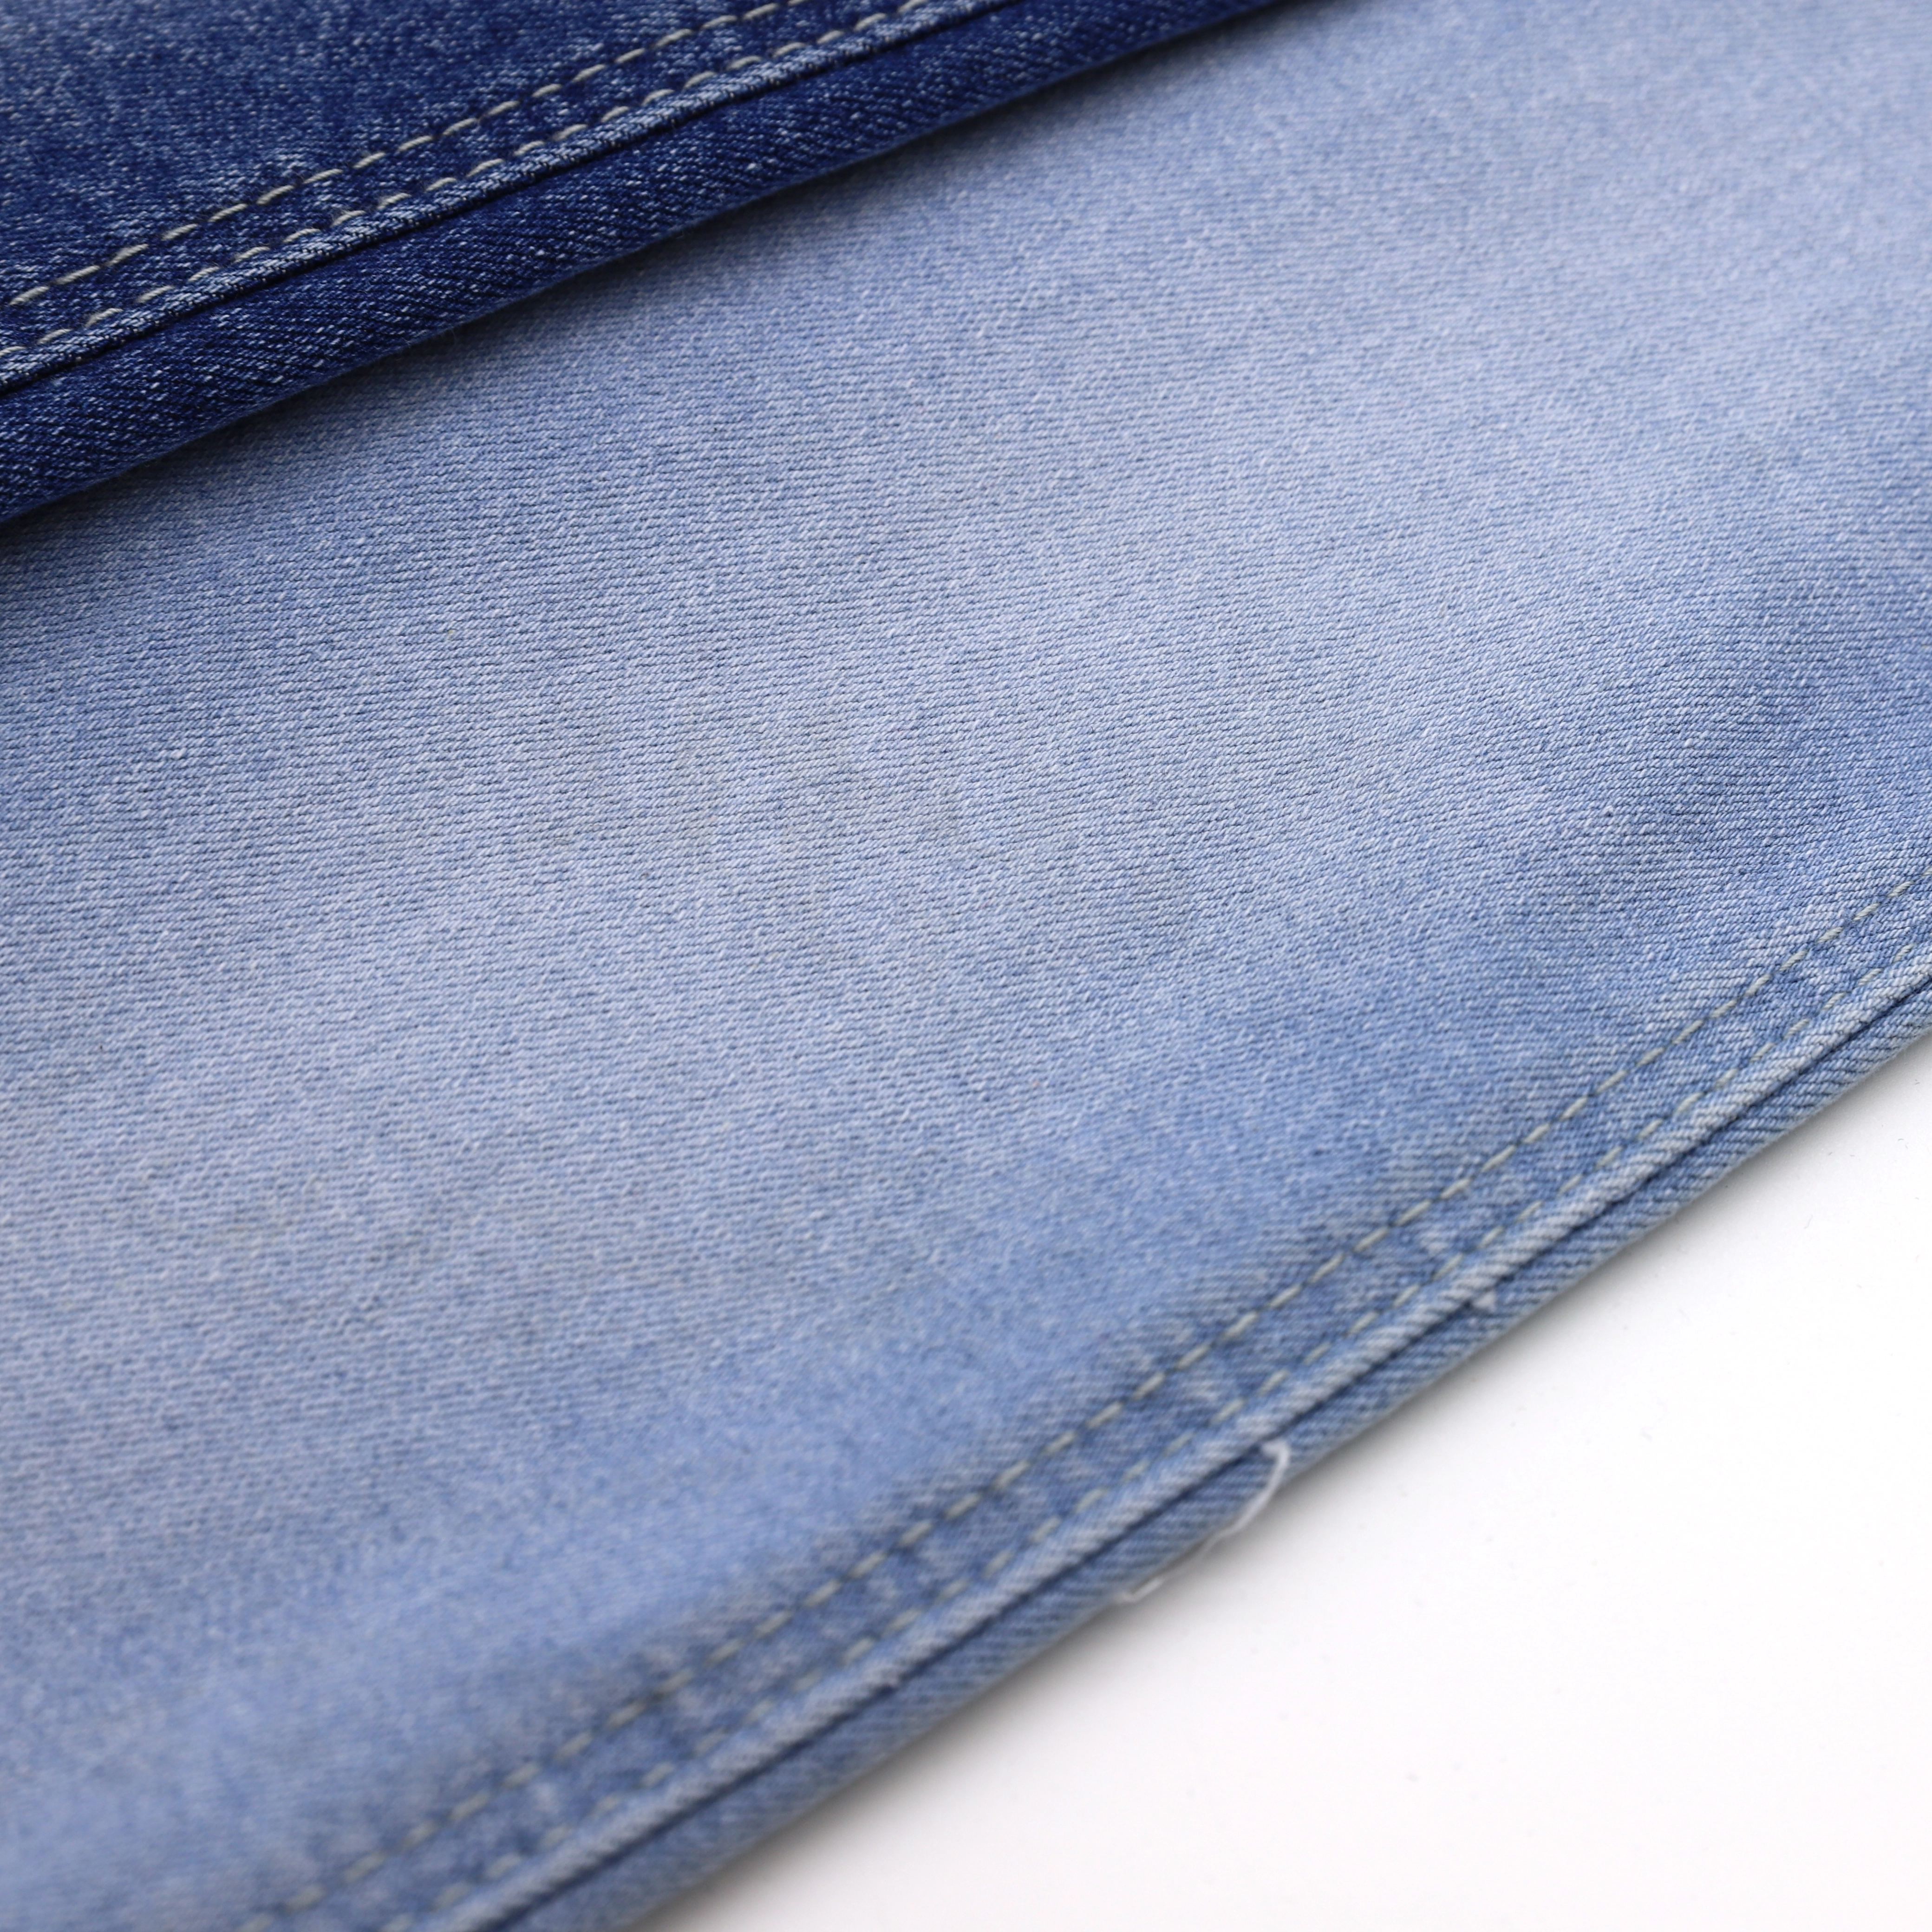 205A-13 super stretch denim fabric with 64%cotton  30.5S%poly  3.5%spandex   1%other 5